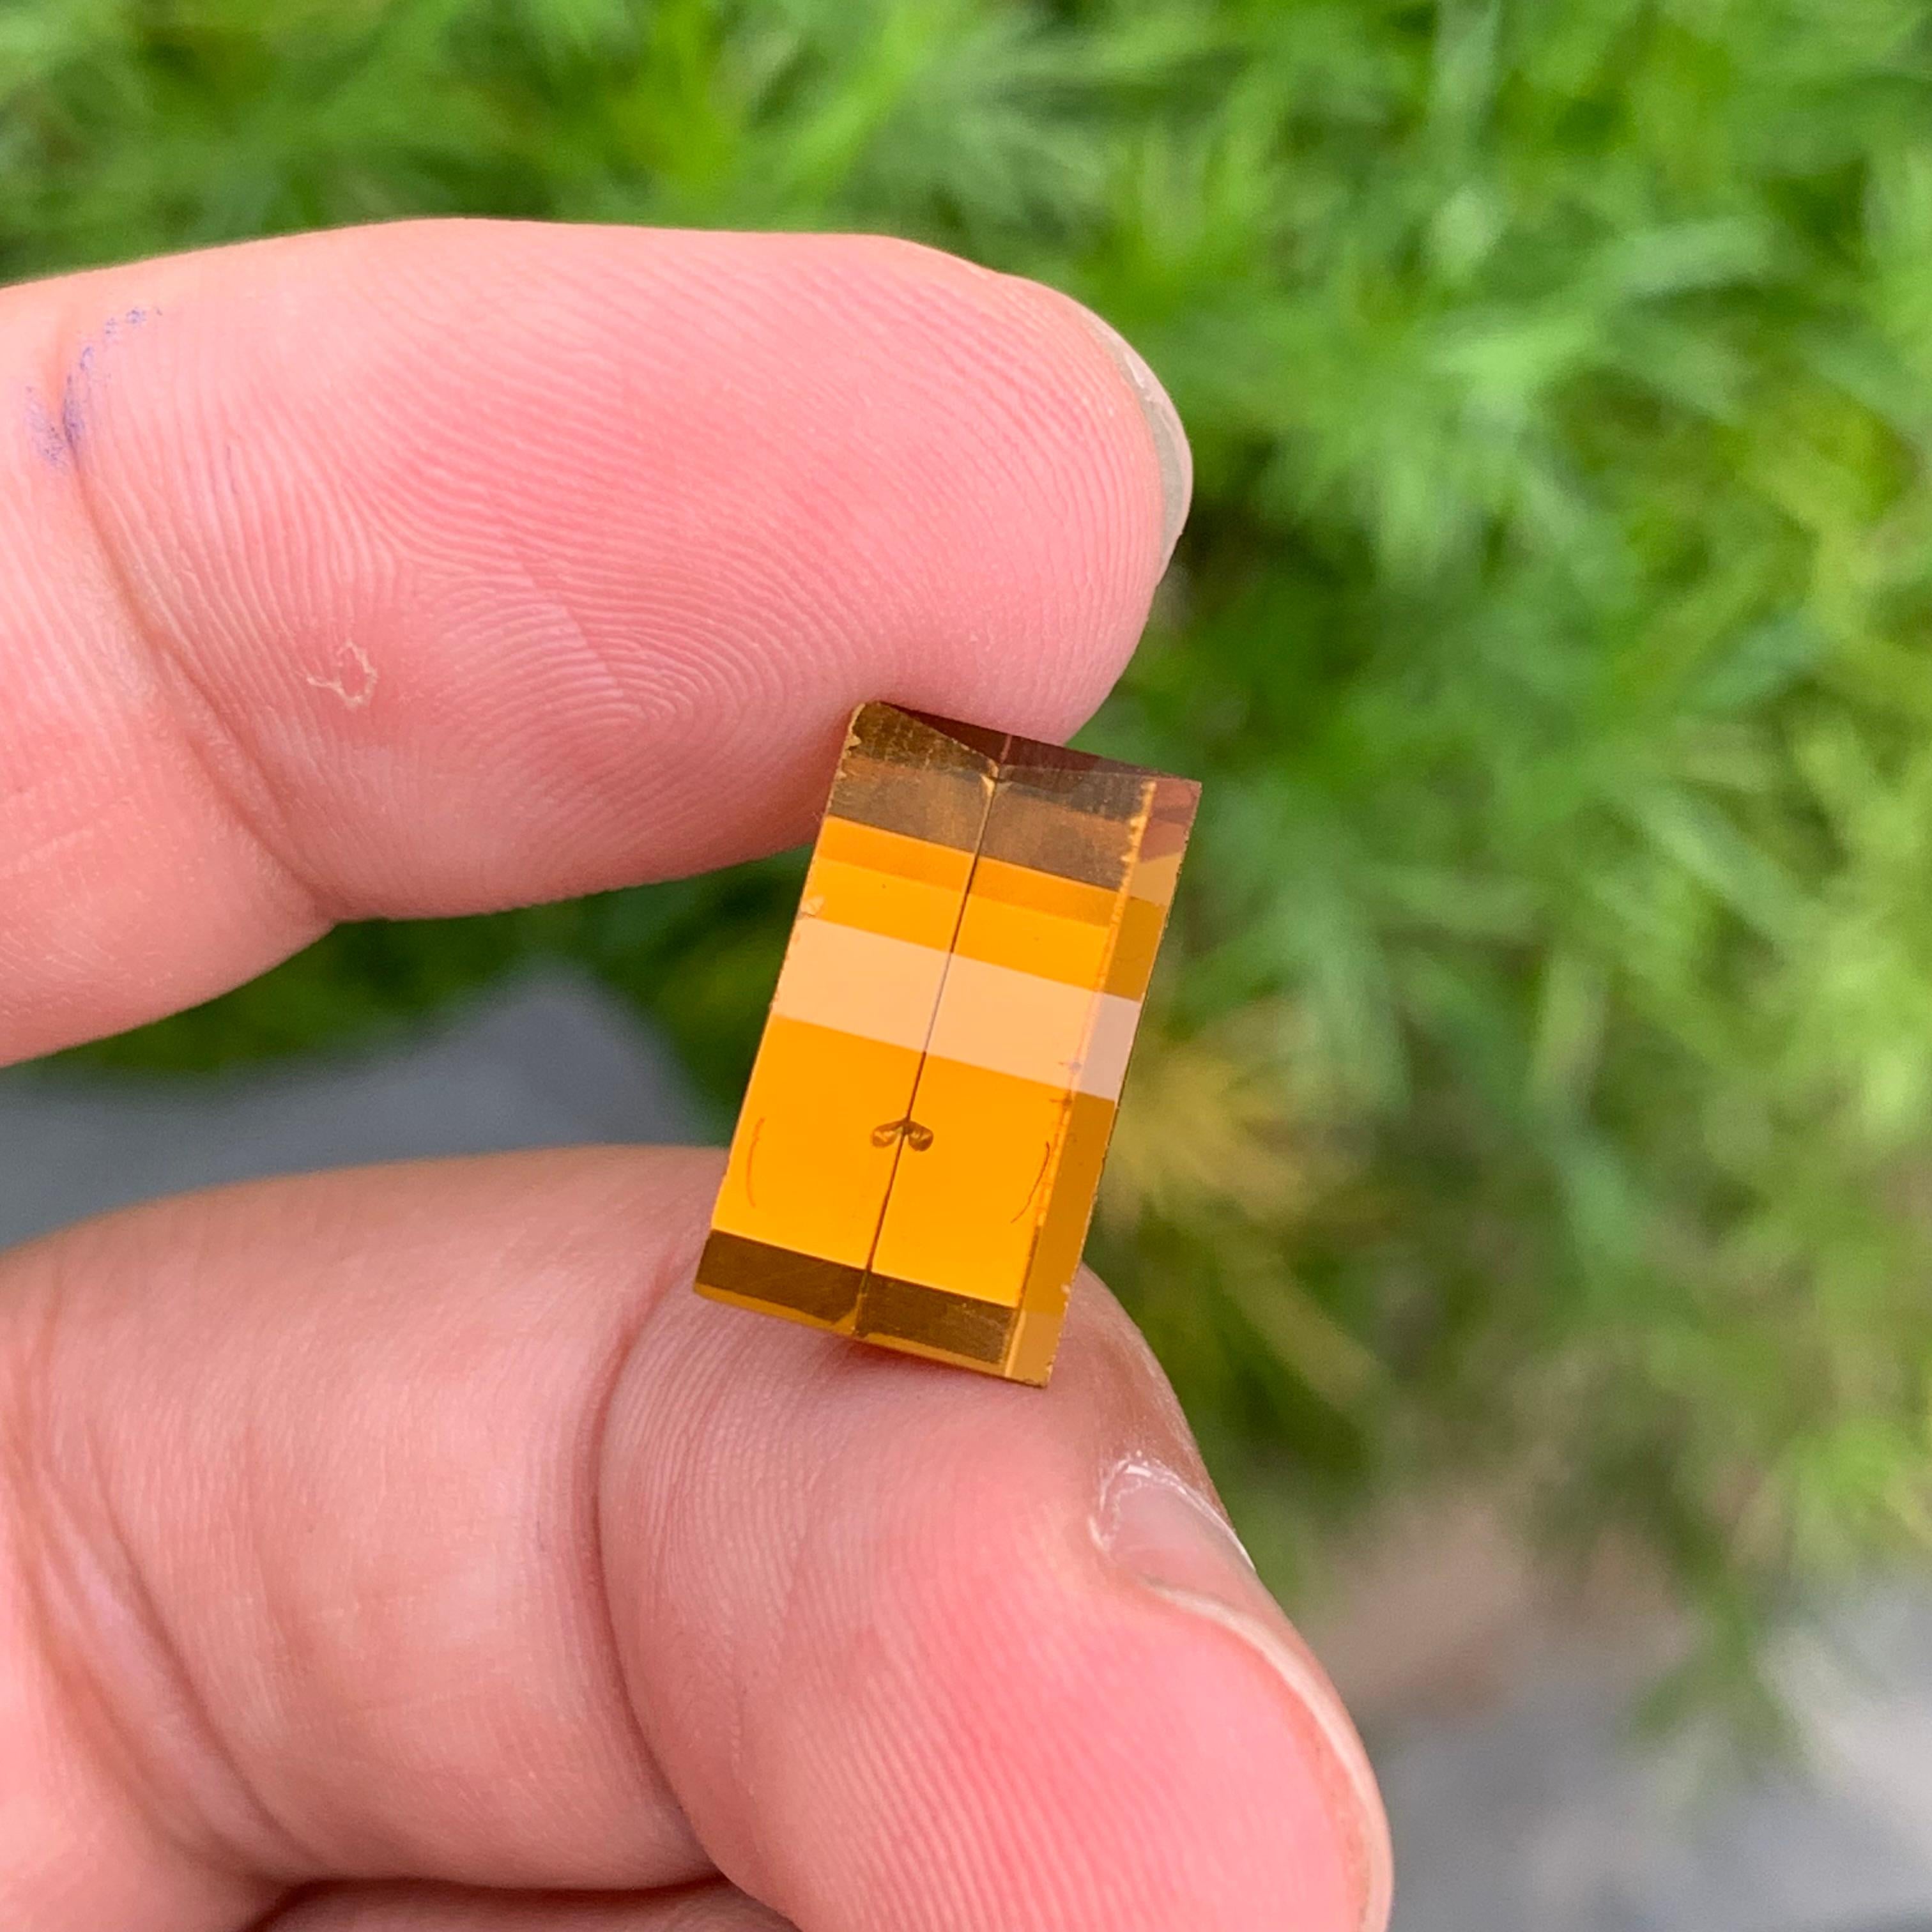 6.75 Carat Natural Loose Pixel Cut CItrine Gemstone From Brazil For Sale 1